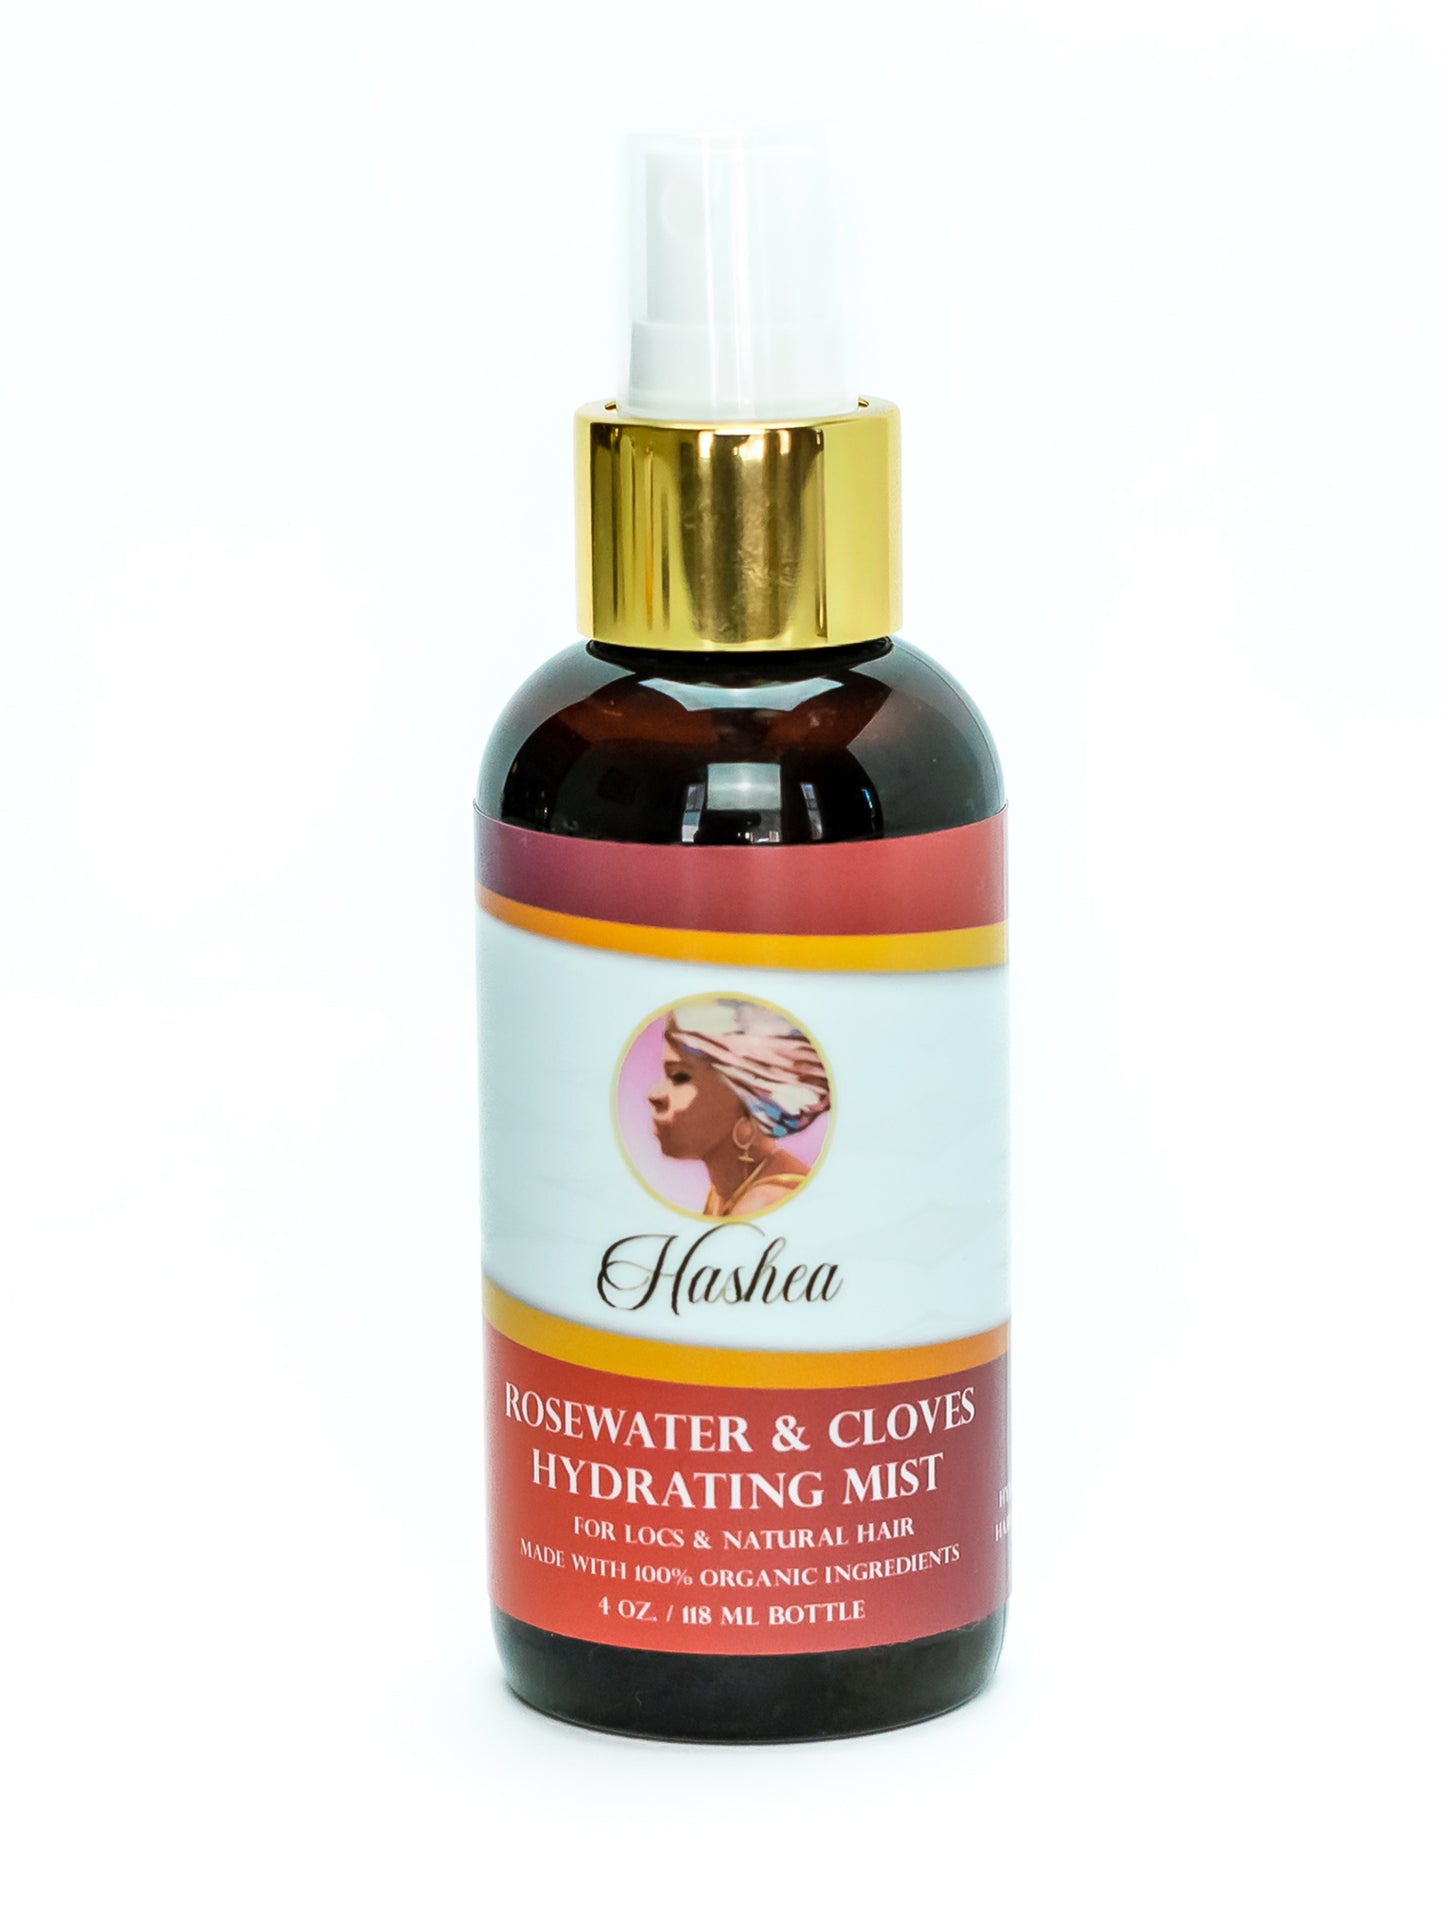 Hashea Rosewater & Cloves Hydrating Mist